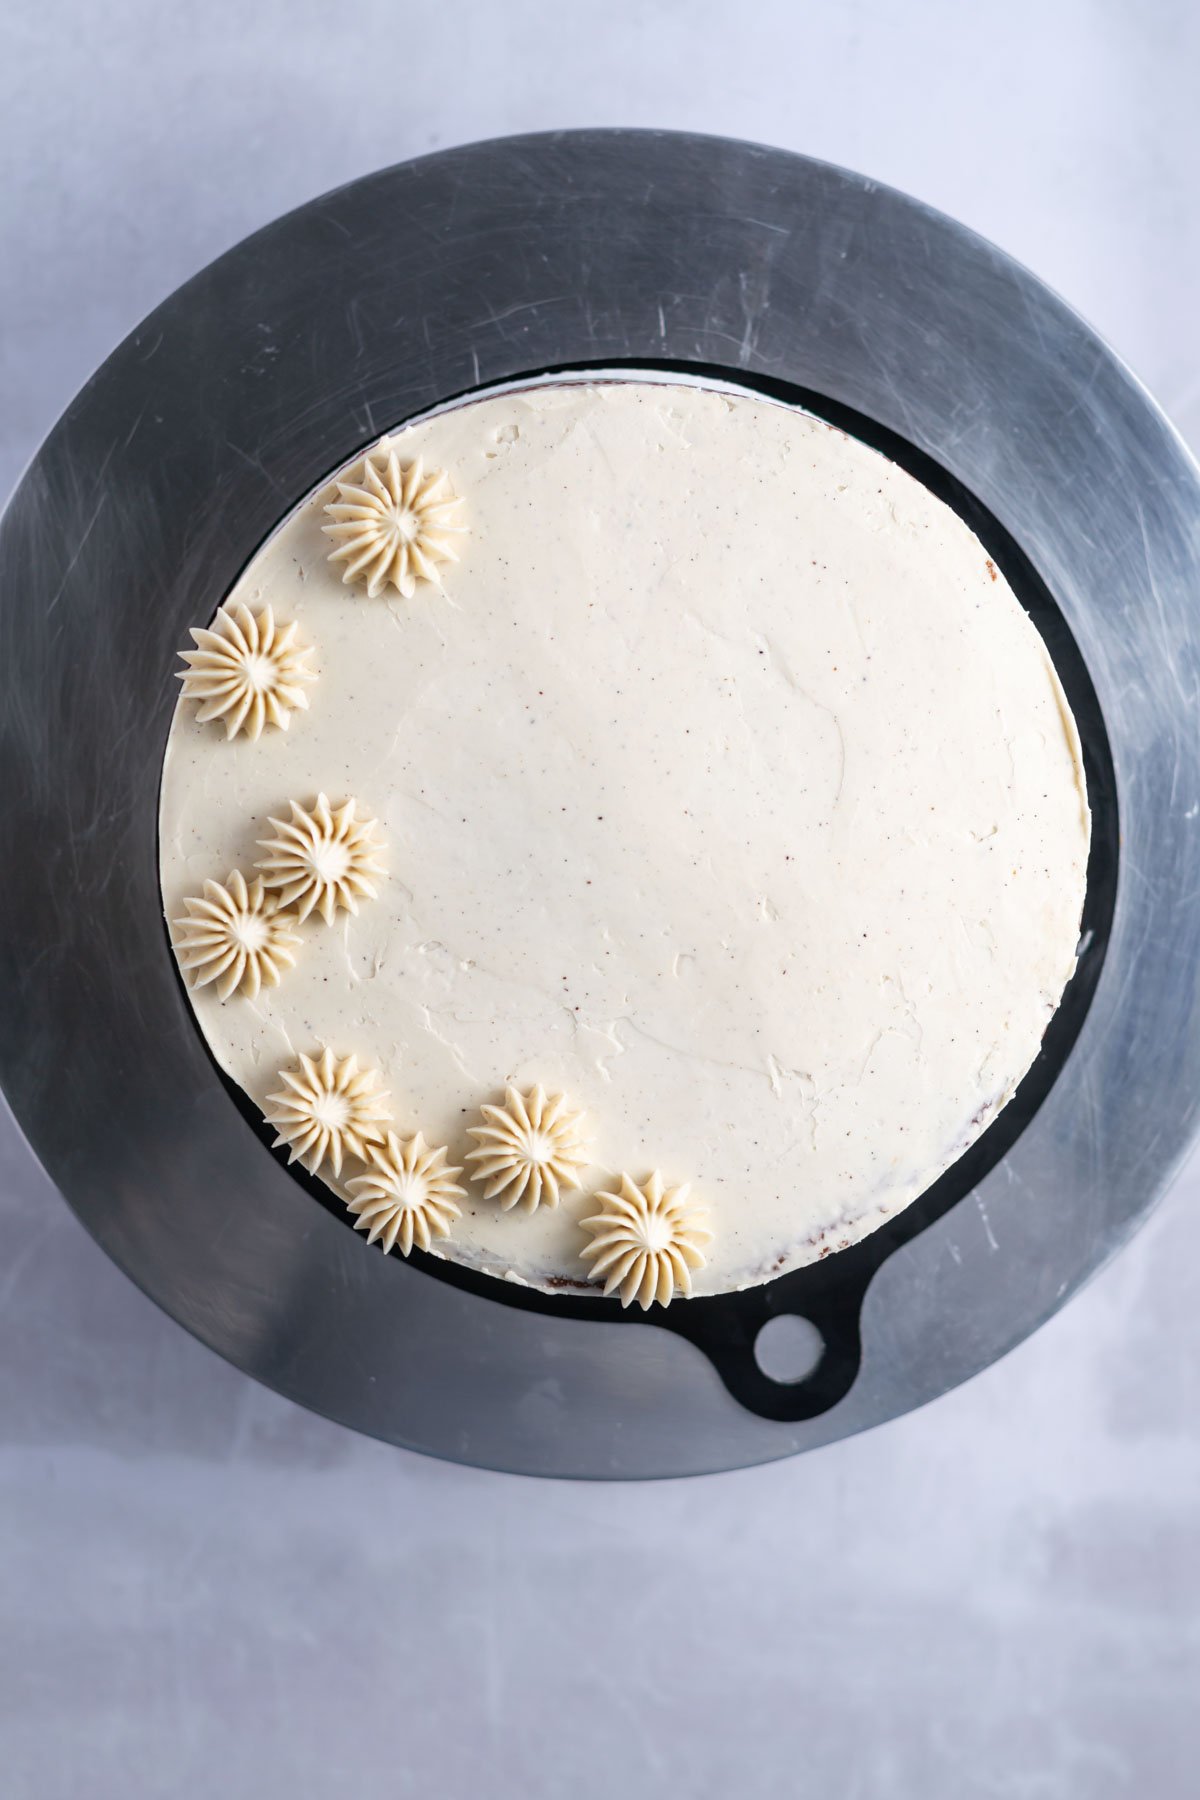 cream colored piping on a cake top